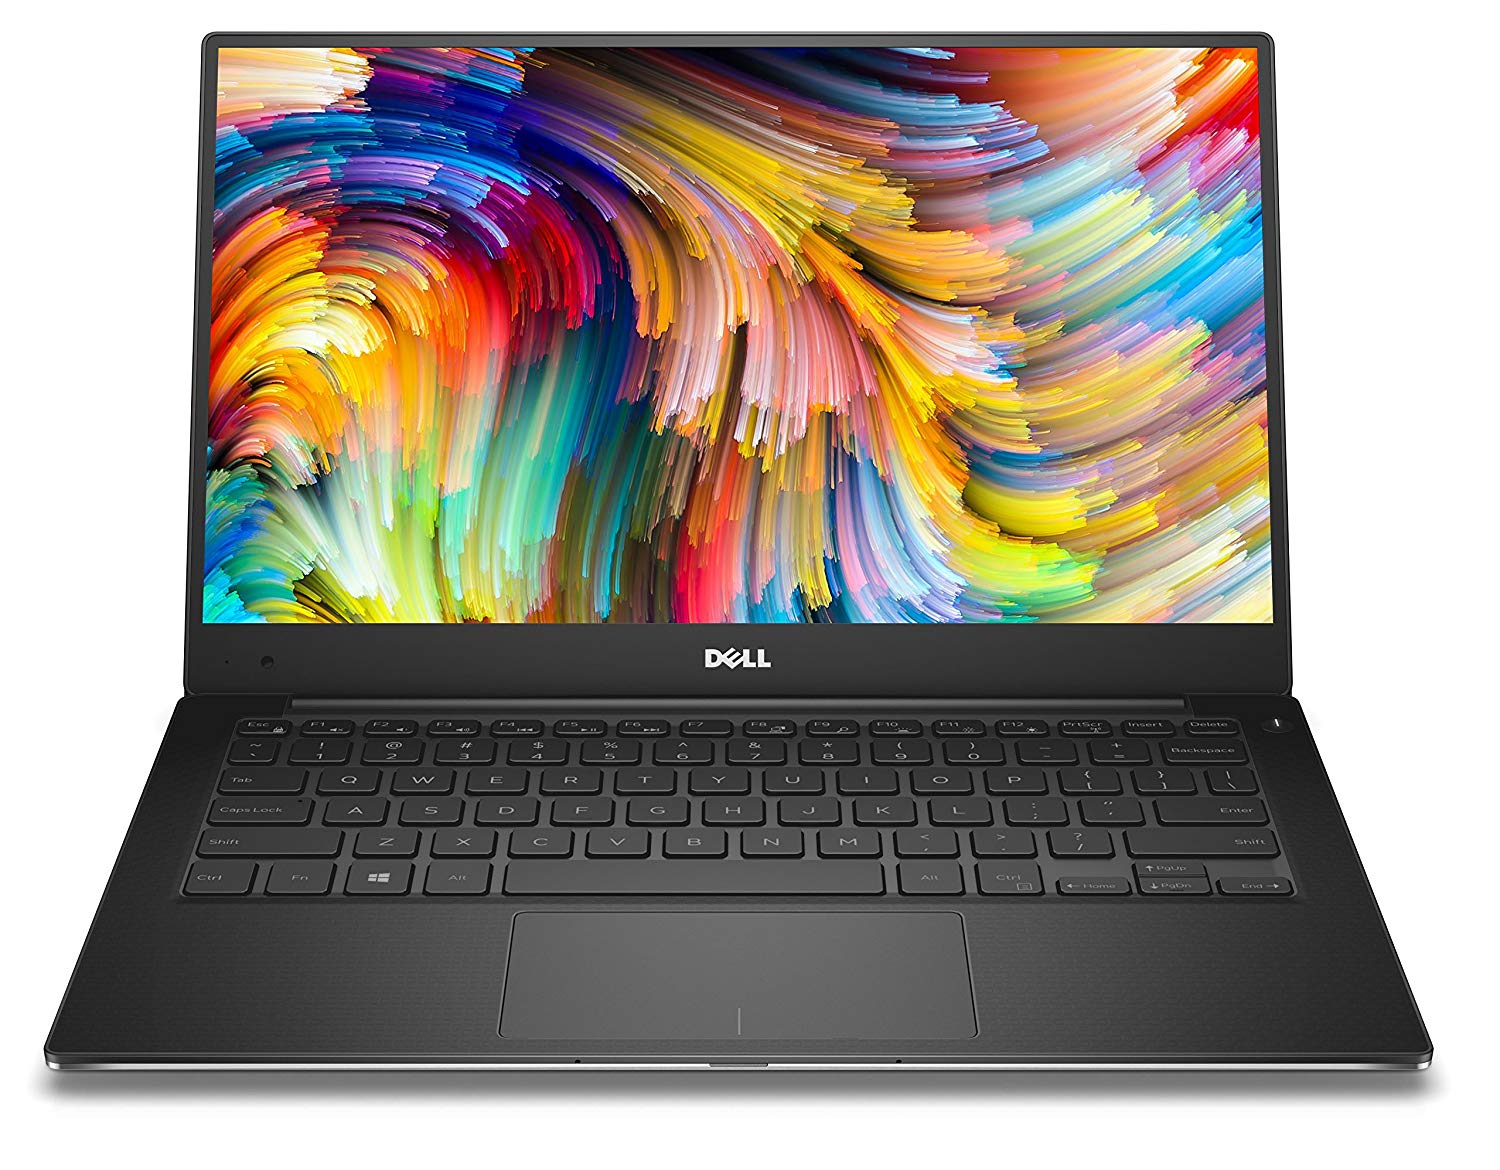 Dell XPS 13 2019 Review Best Laptop in 2019 with Great 4K and